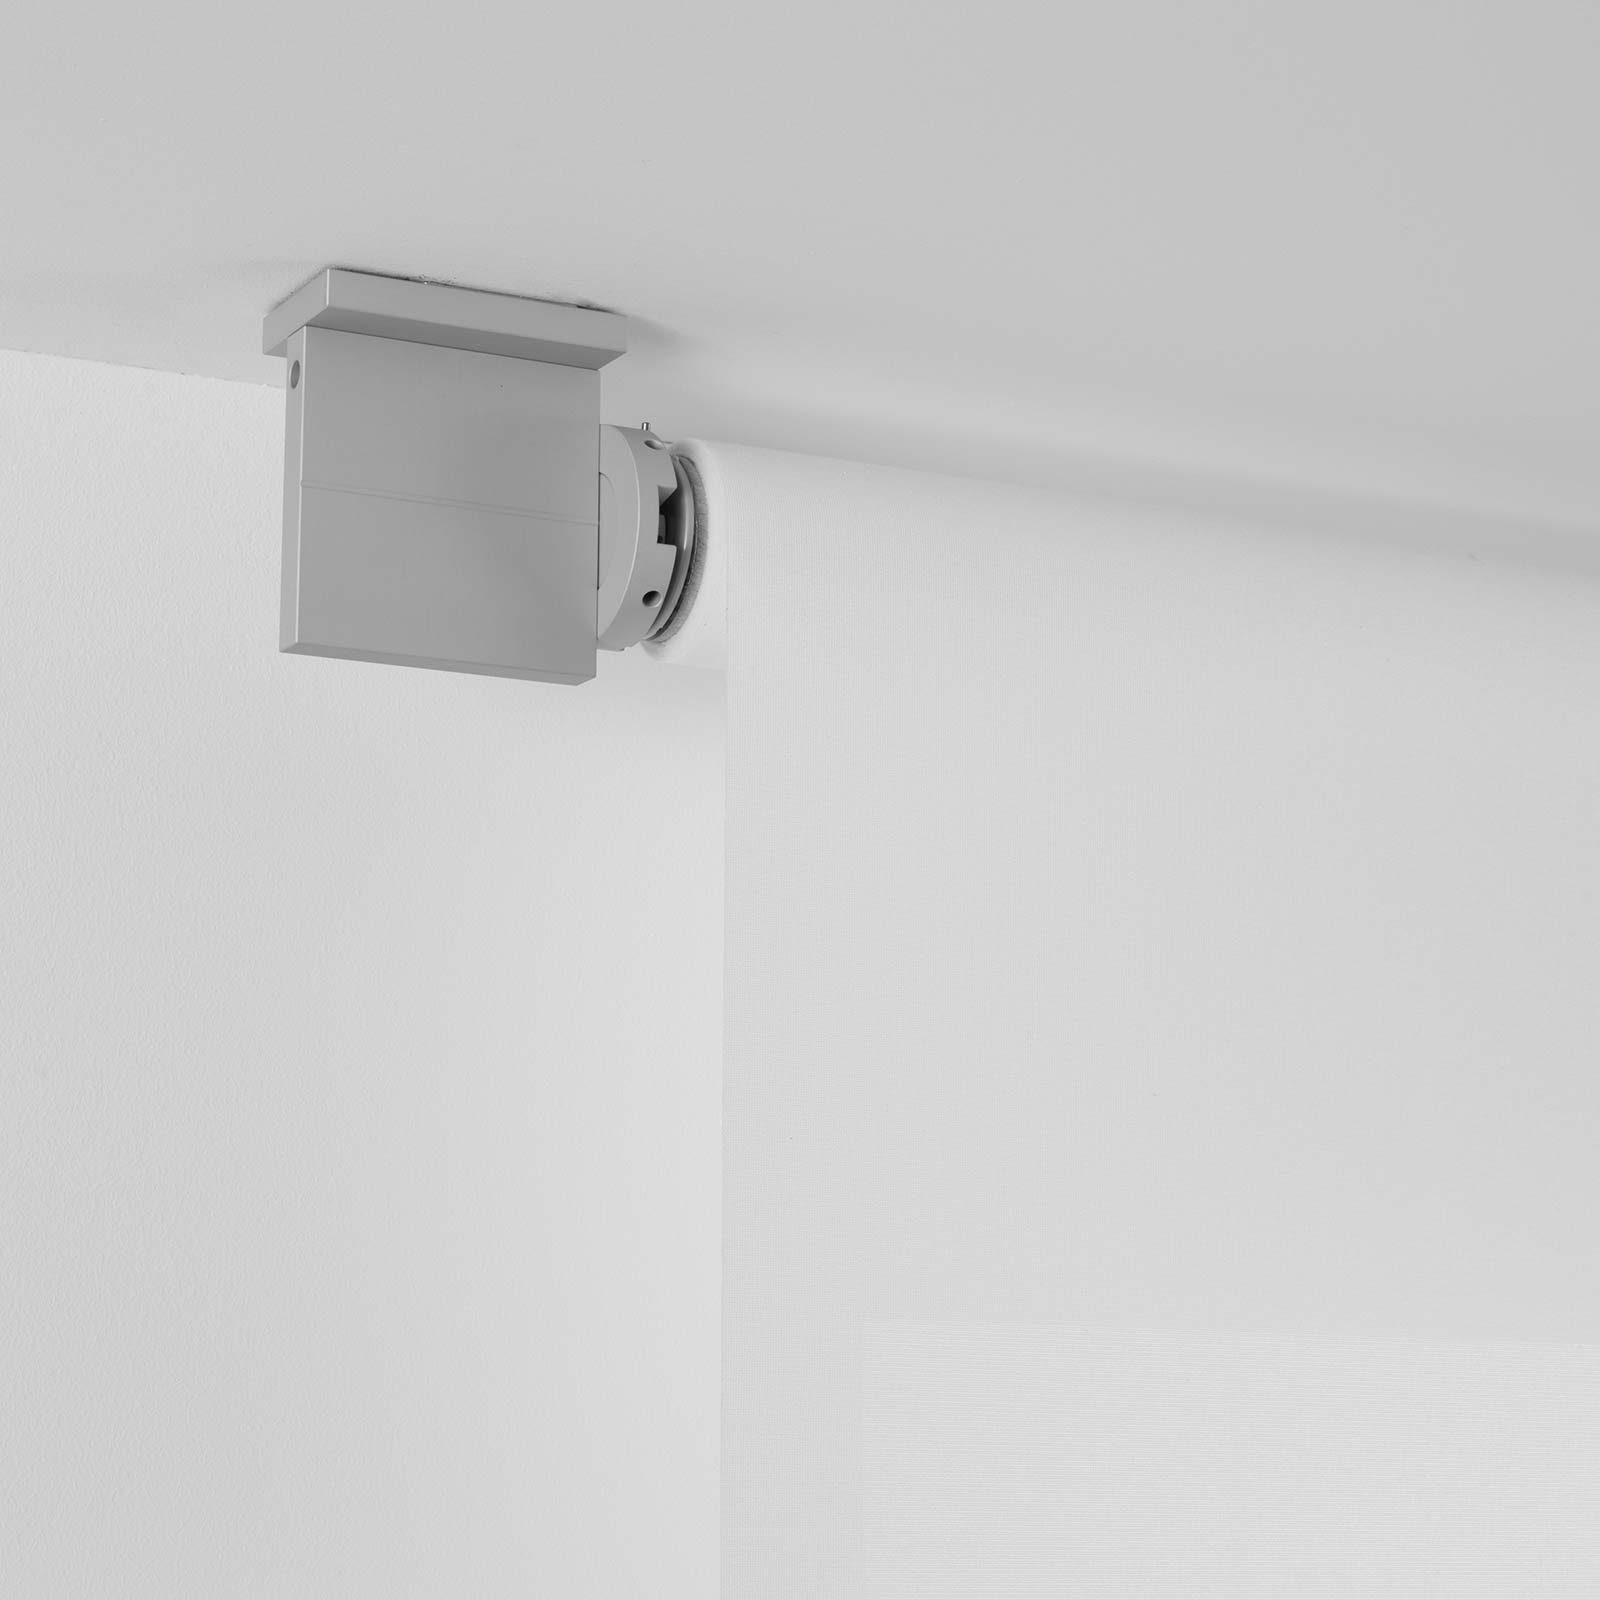 Simply Top — On ceiling mounted